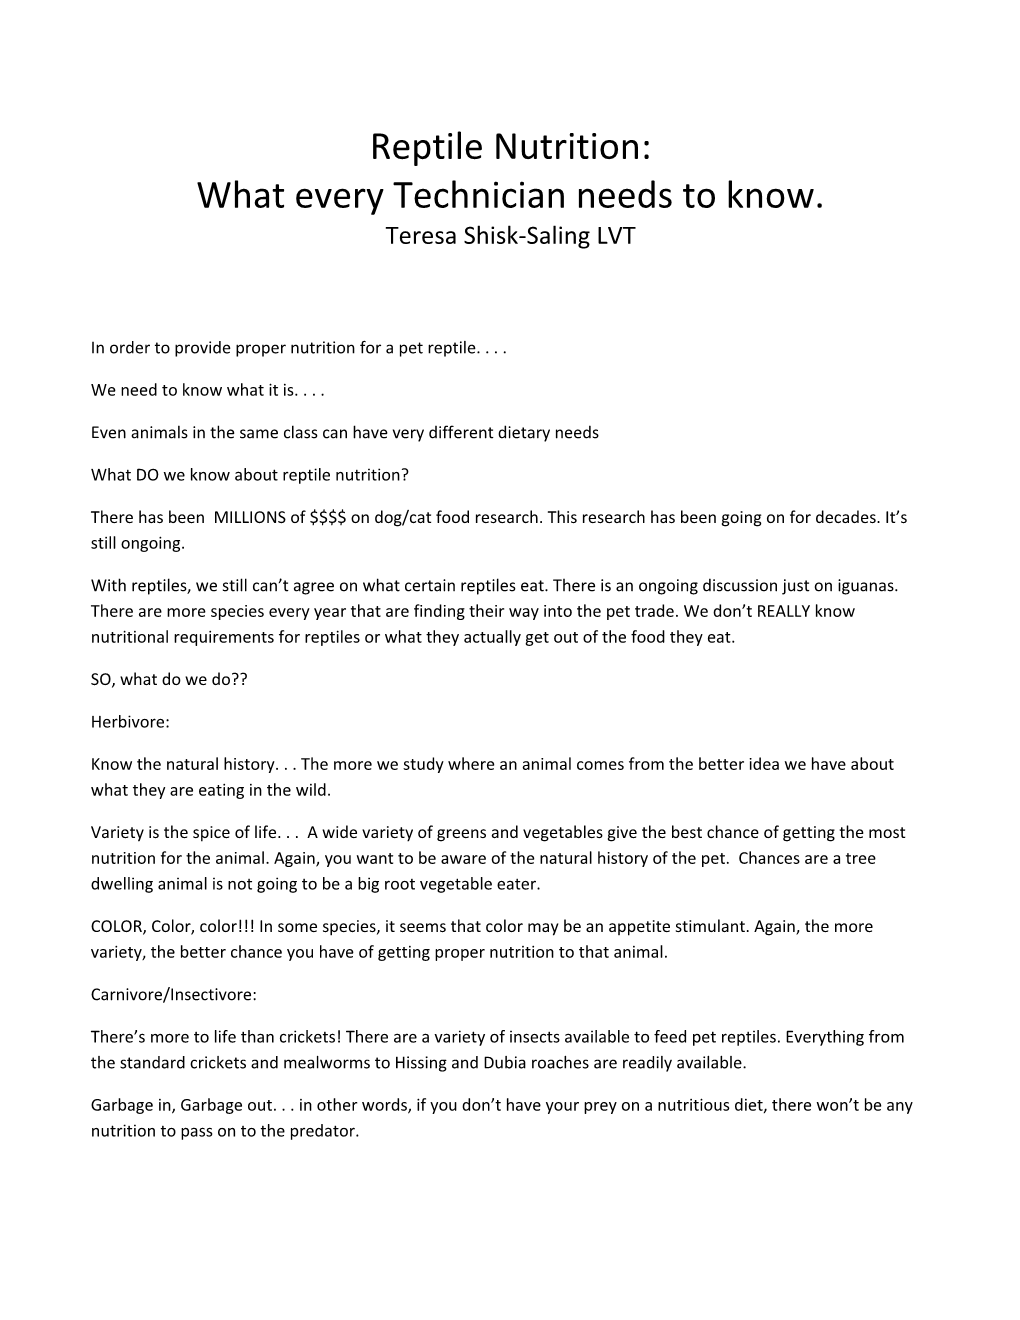 What Every Technician Needs to Know